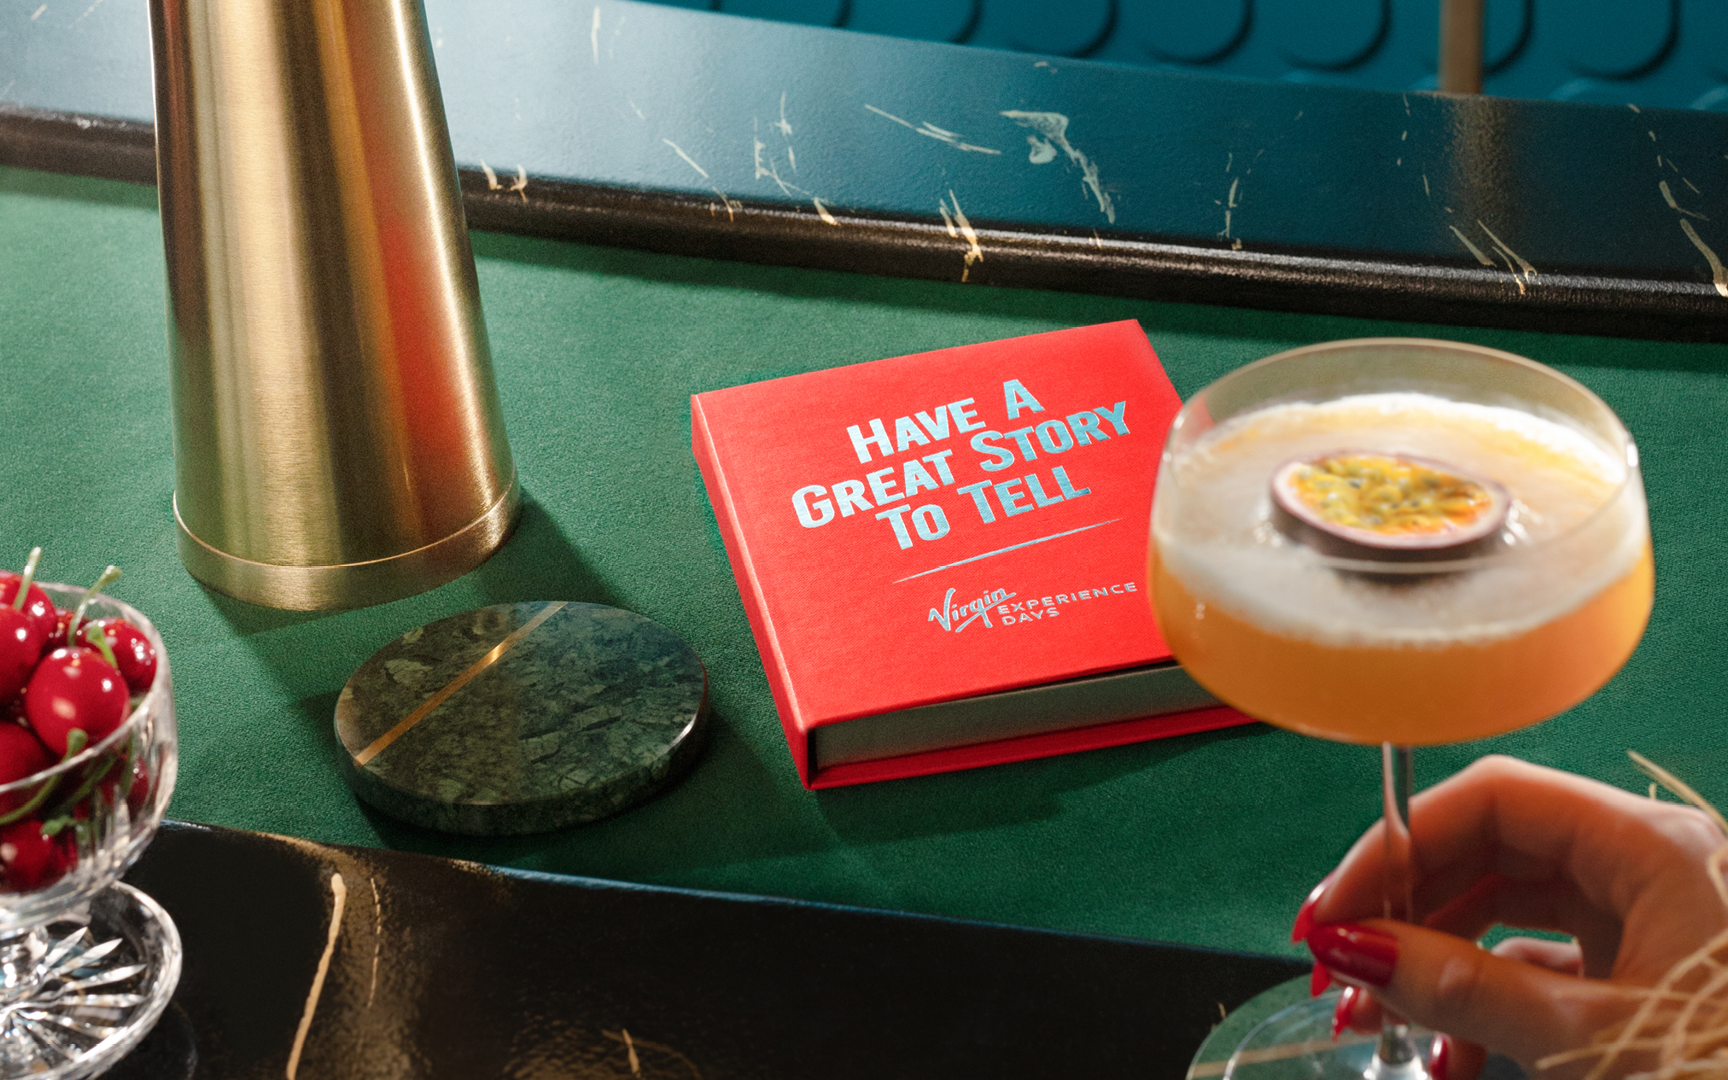 An image of a Virgin Experience Days voucher box next to a cocktail.